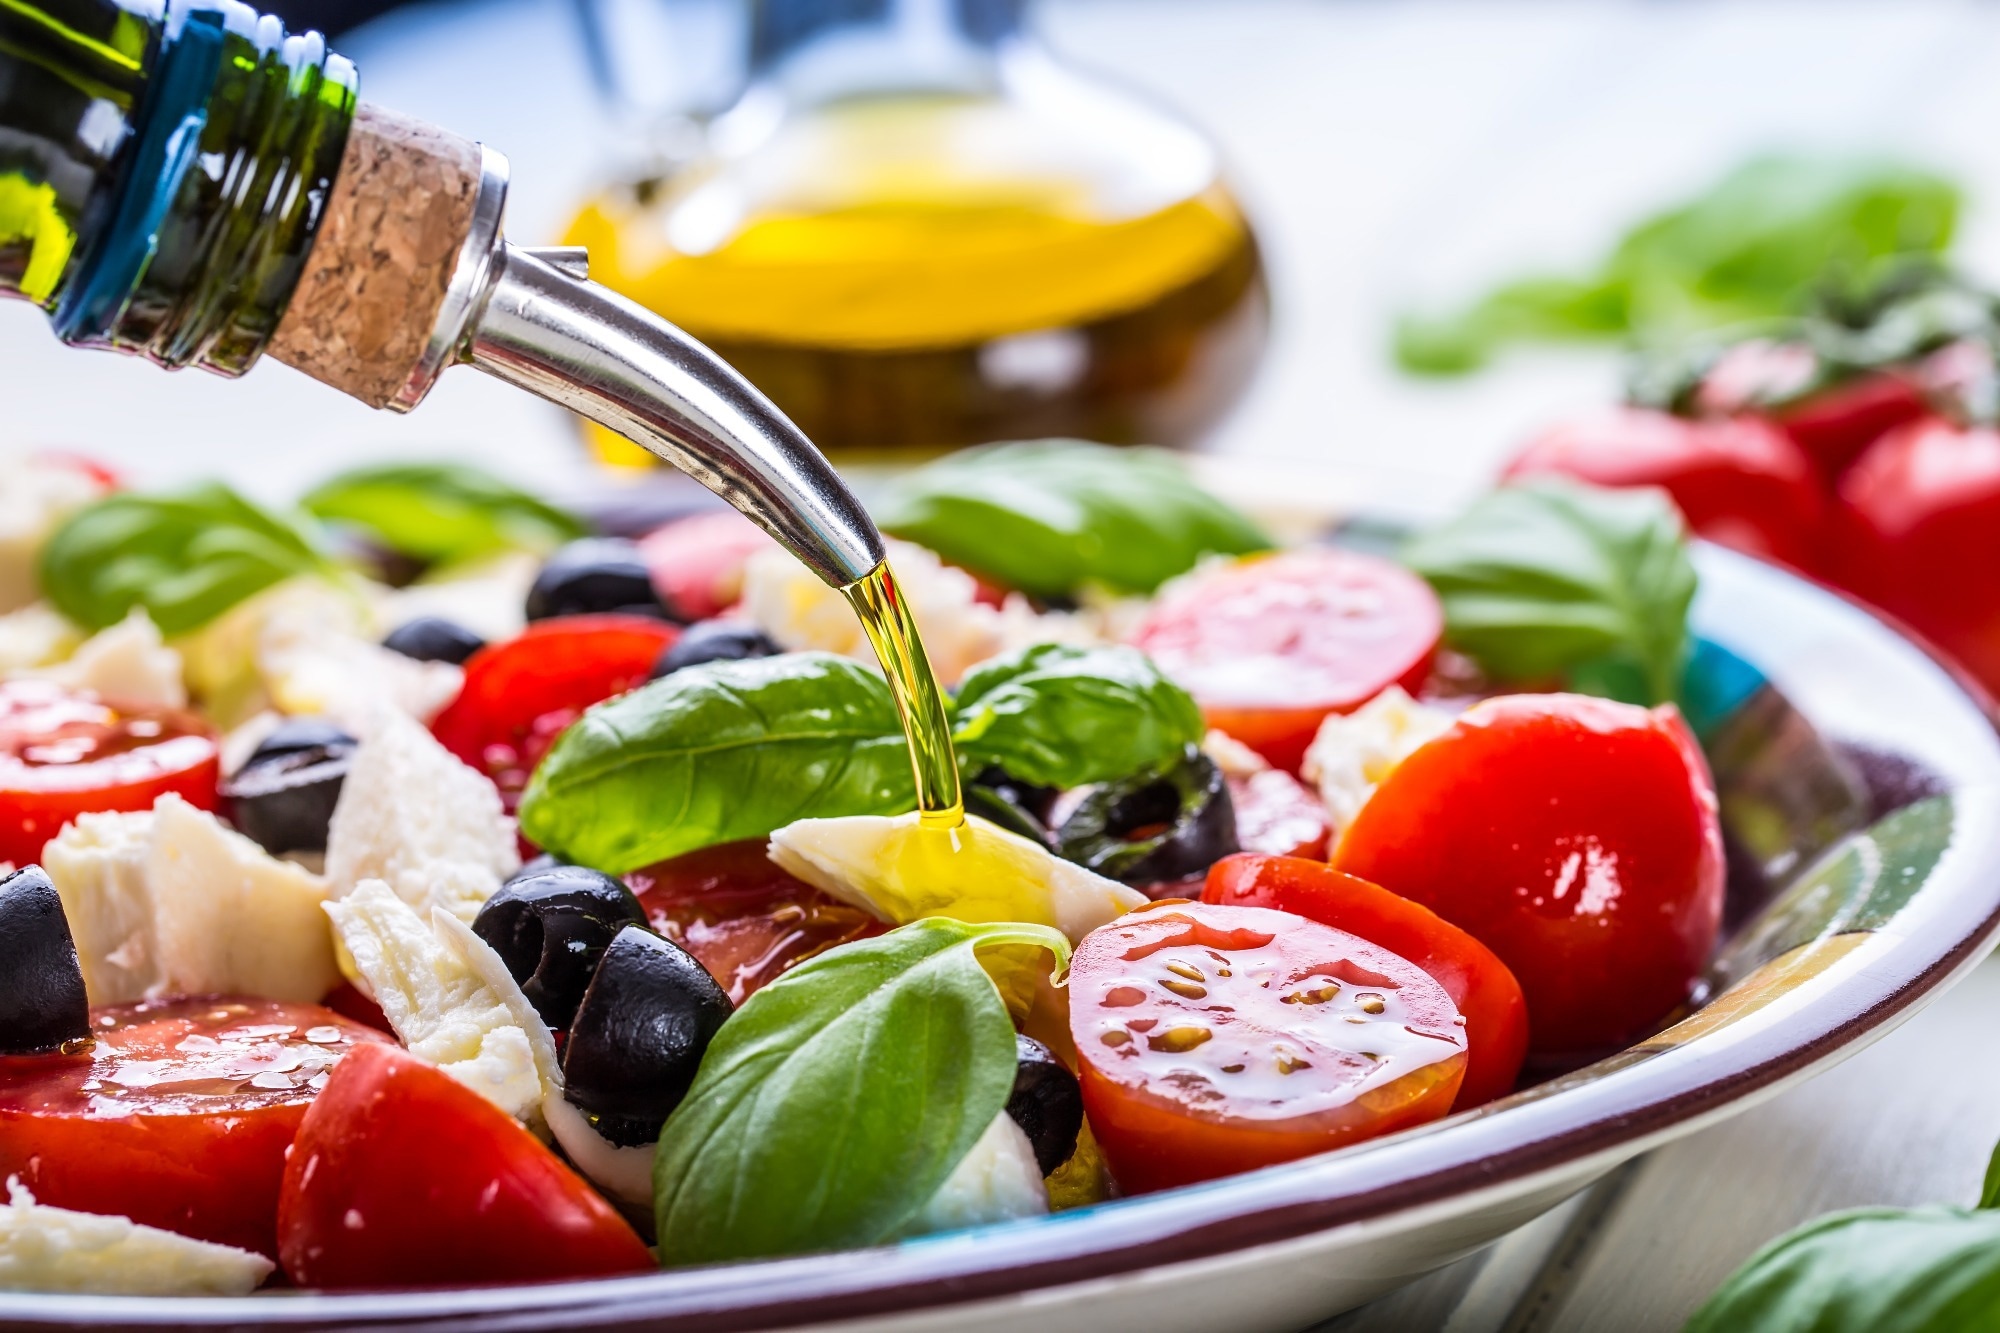 Study: Impact of the Mediterranean Diet on the Gut Microbiome of a Well-Defined Cohort of Healthy Individuals. Image Credit: Marian Weyo / Shutterstock